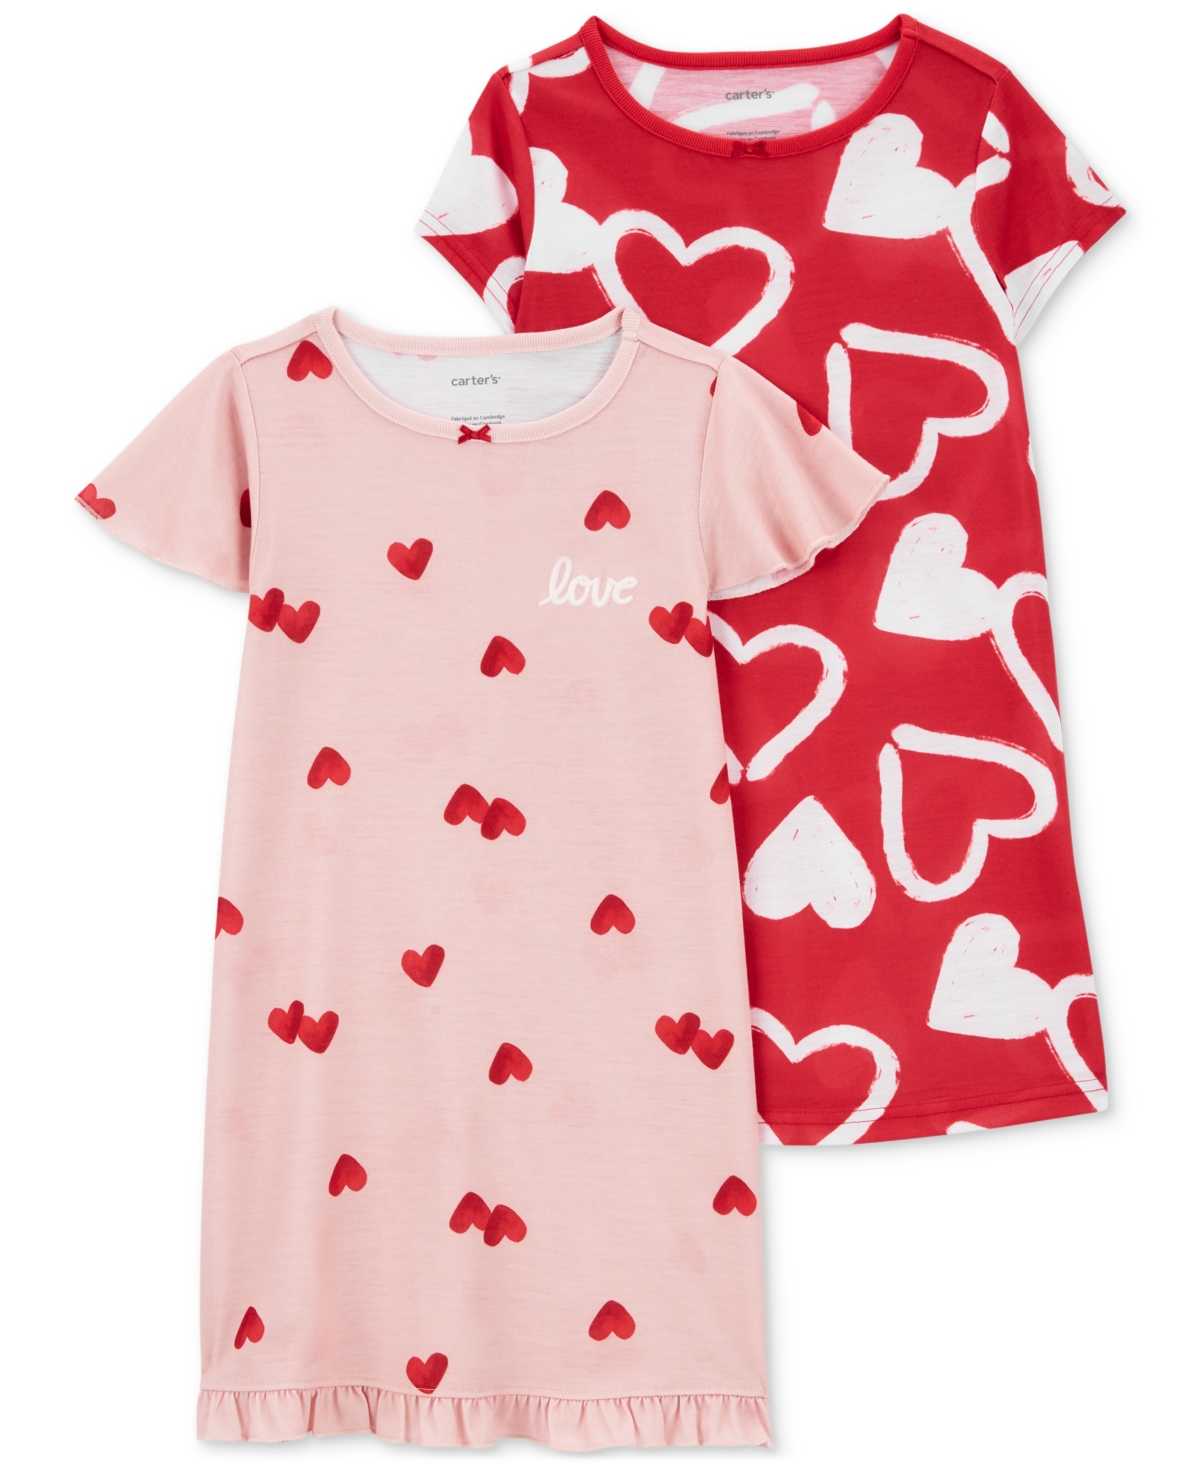 Carter's Babies' Toddler Heart-print Nightgowns, Pack Of 2 In Pink,red